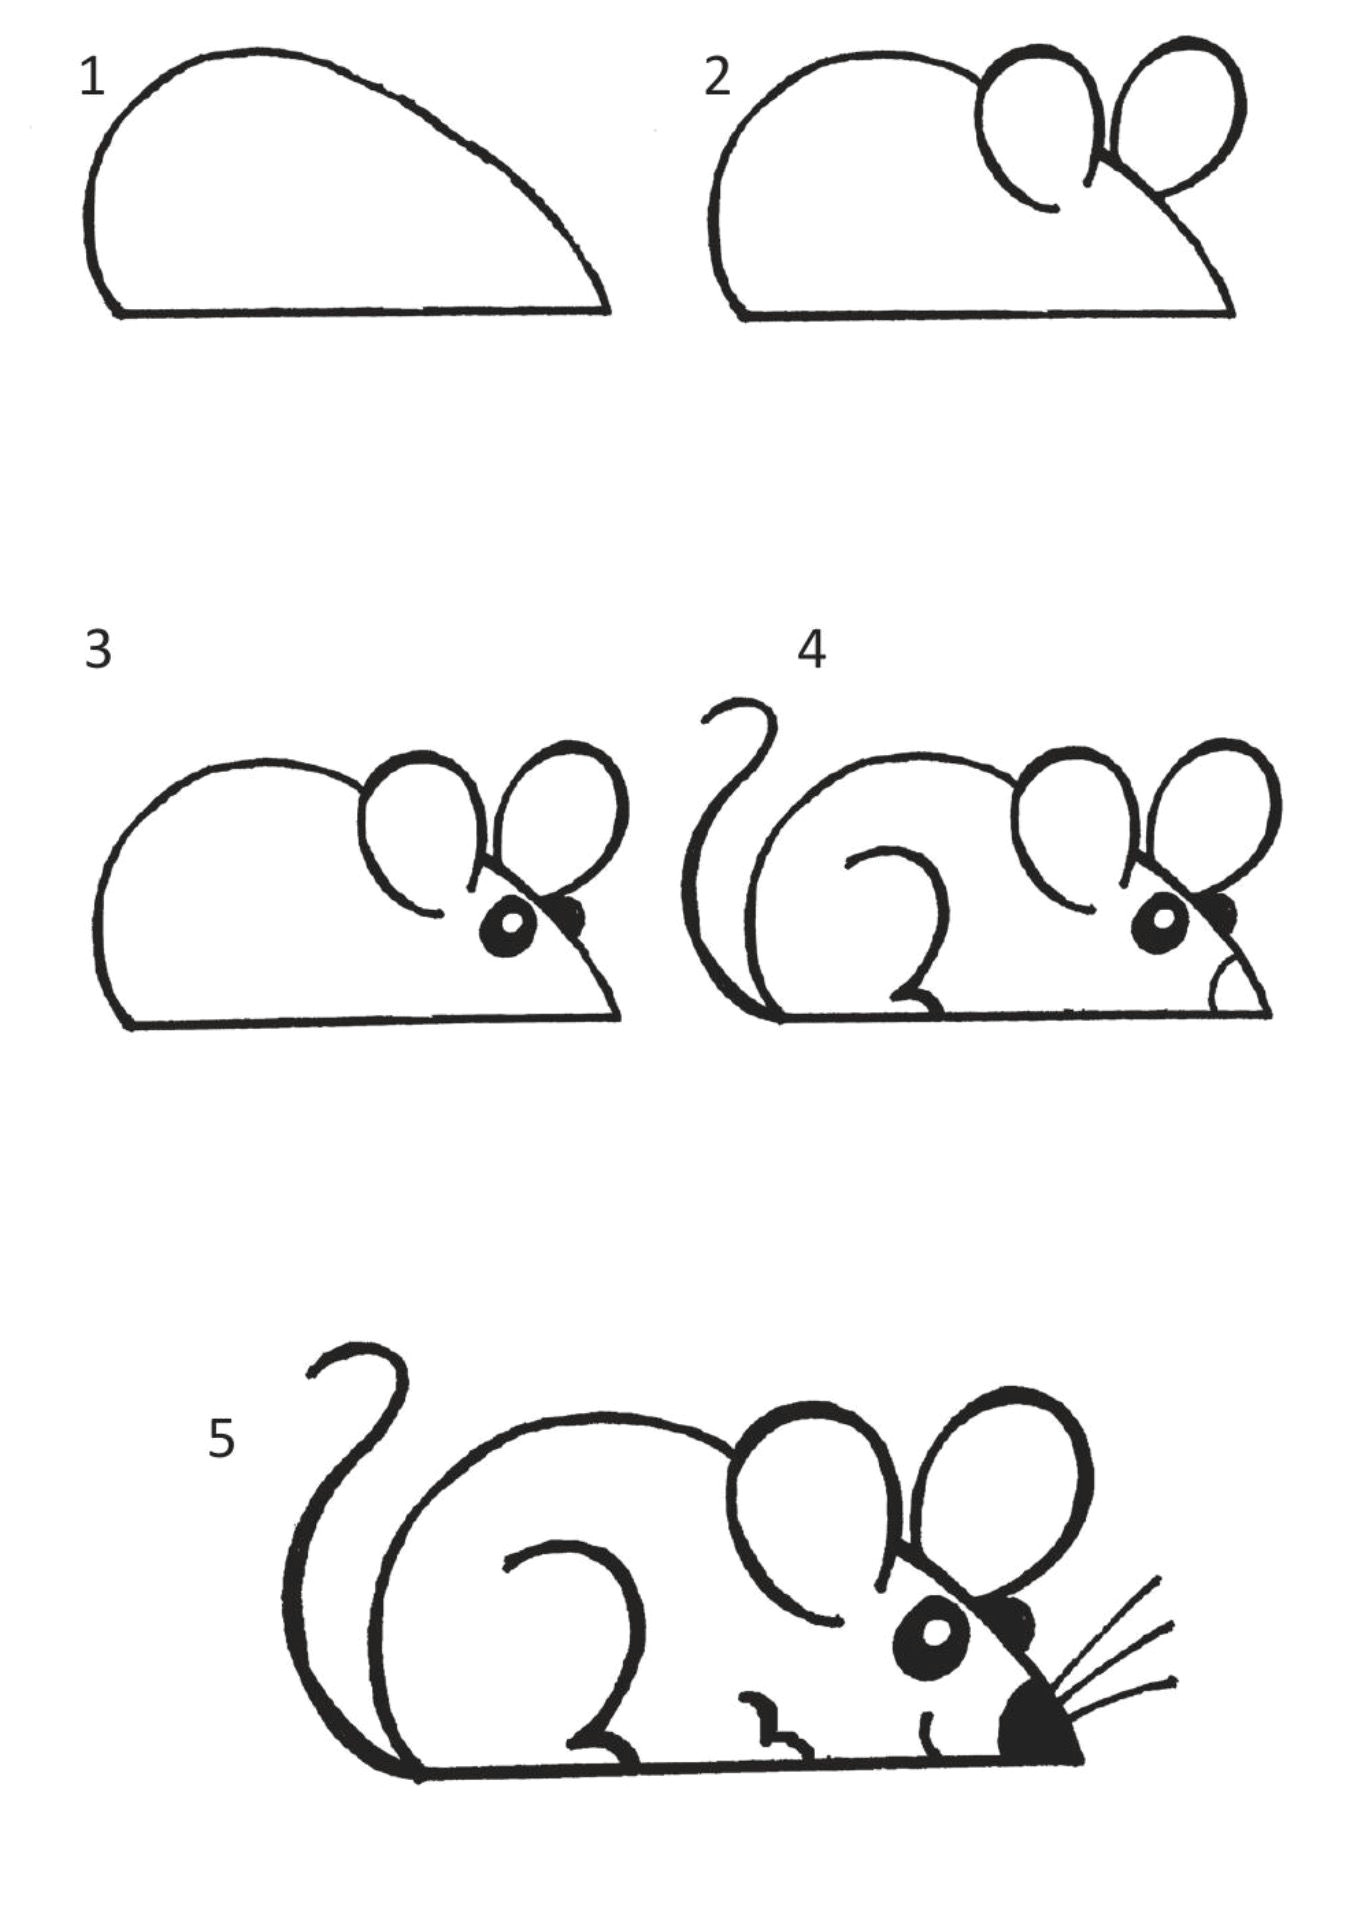 How to Draw Cute Simple Animals Quick Mouse Doodle for when You Want A Doodle that Looks